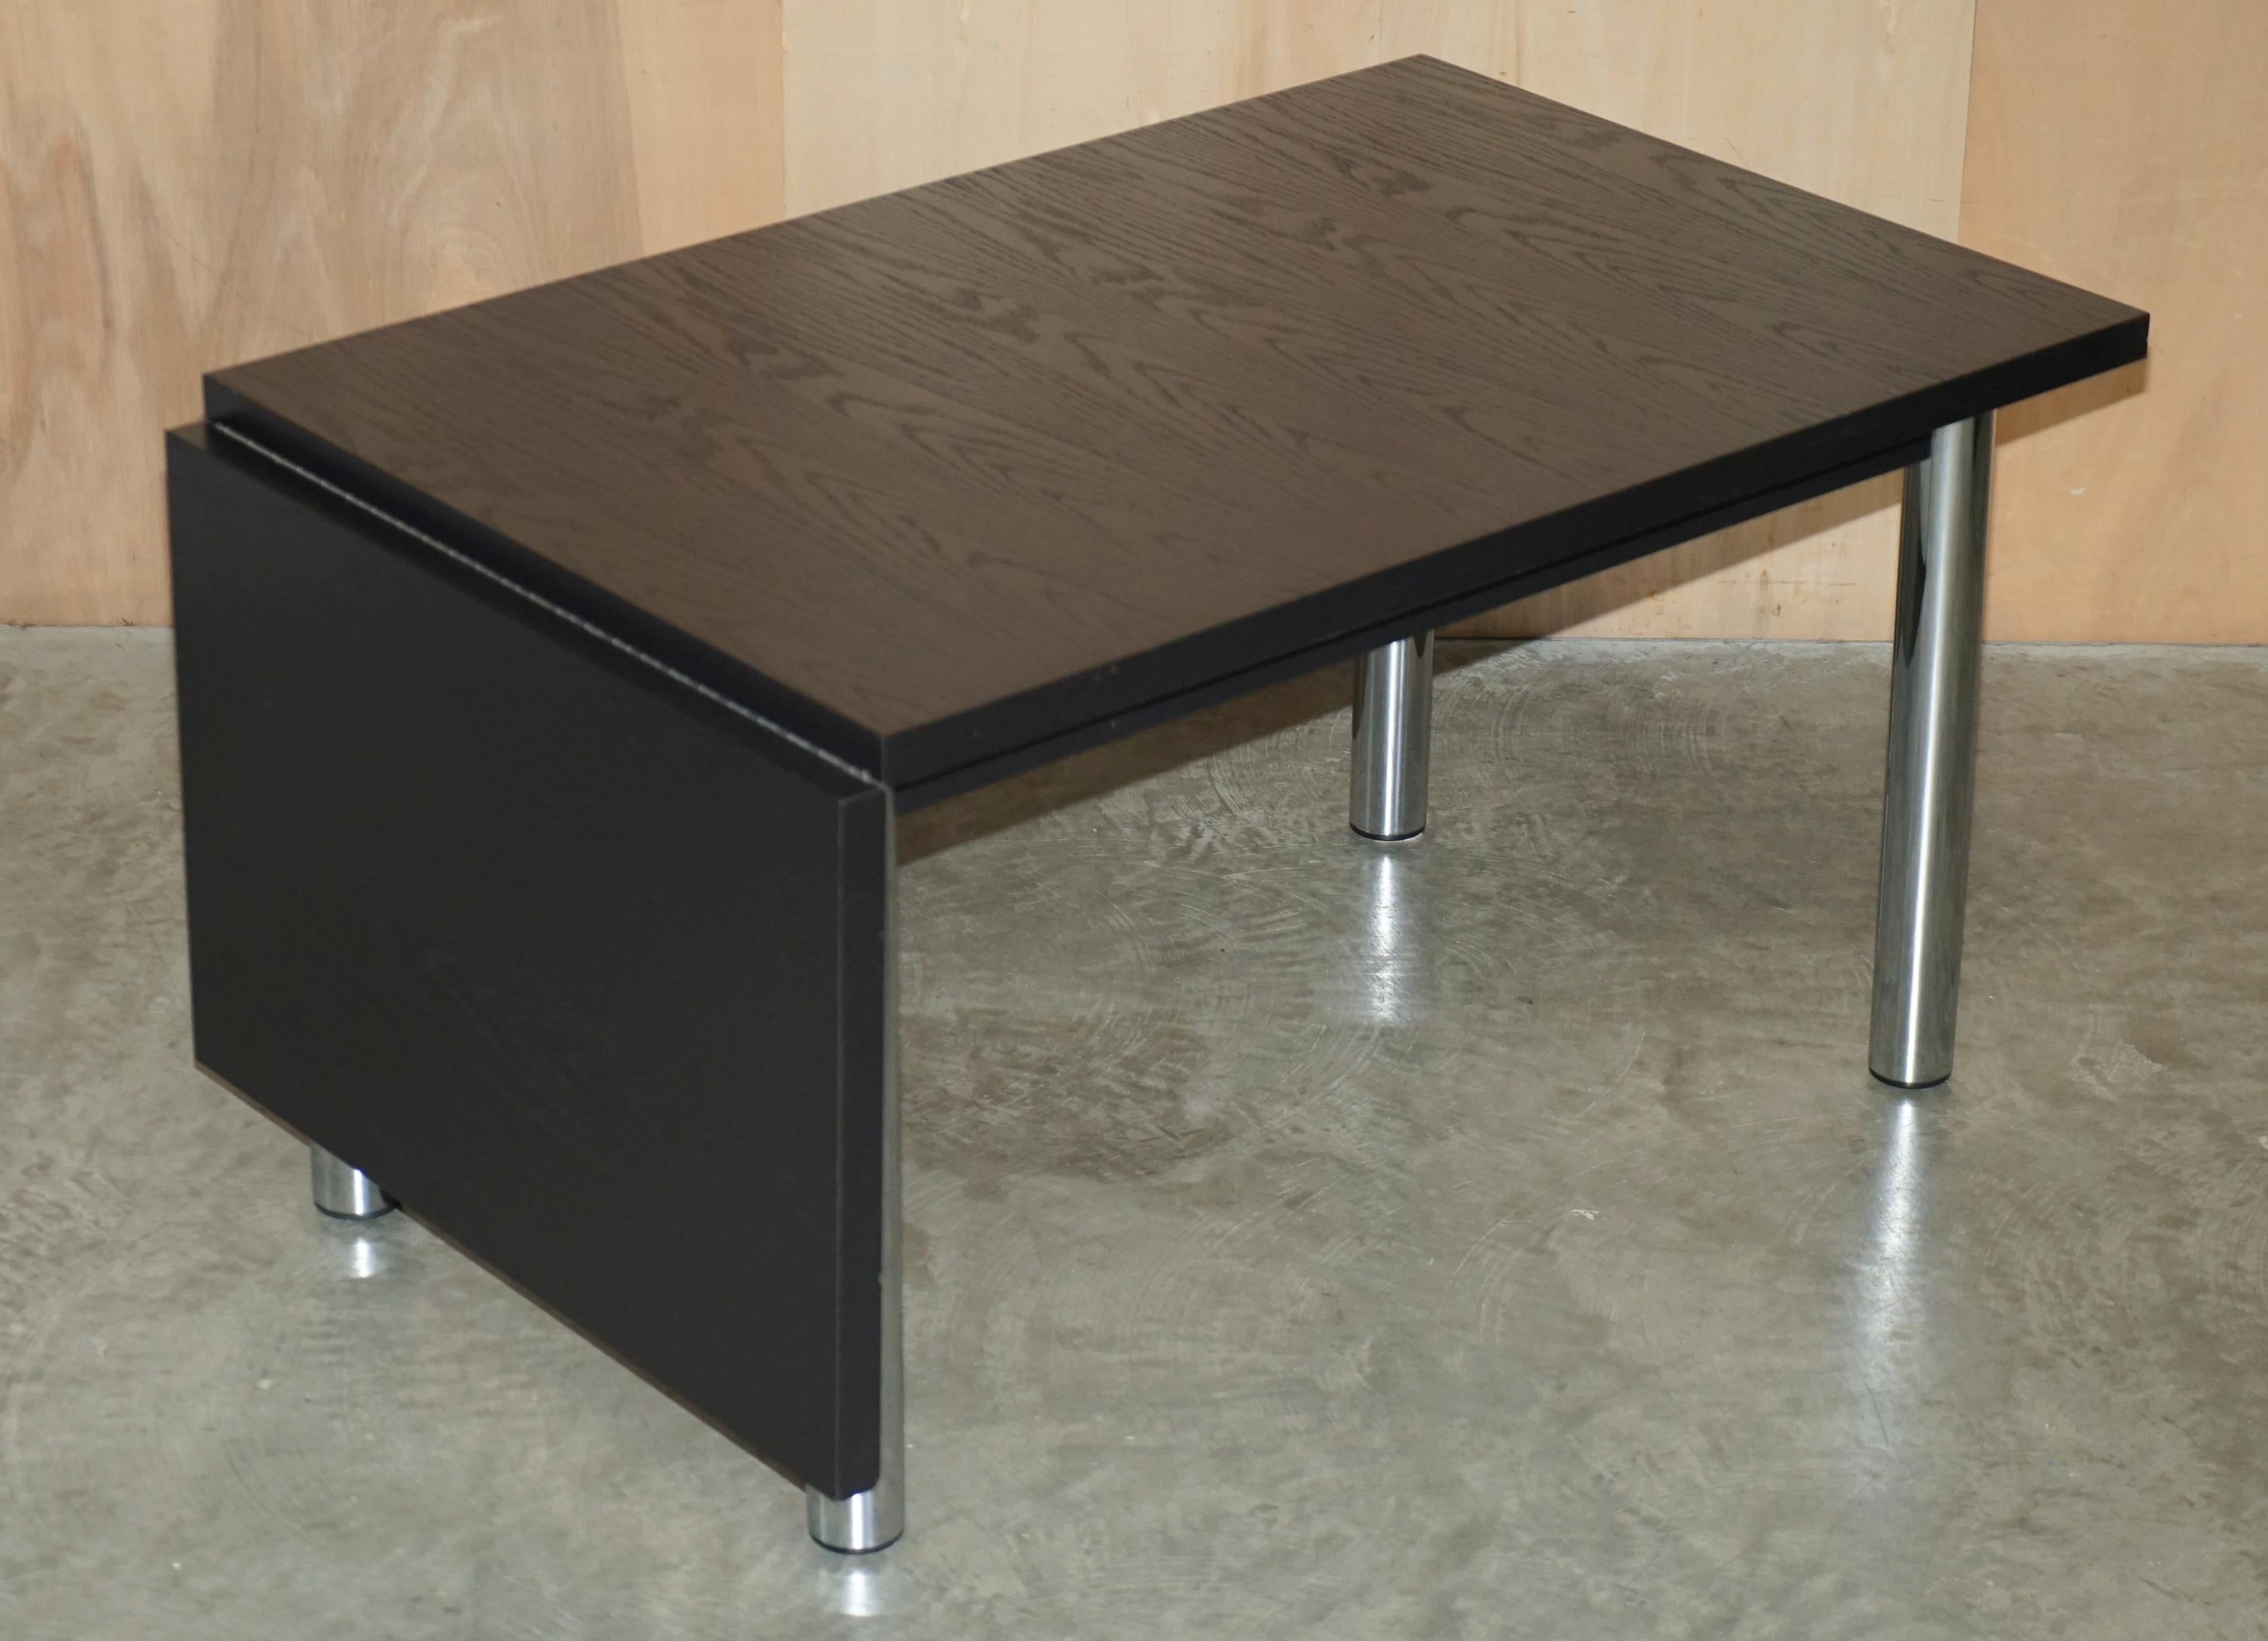 Royal House Antiques

Royal House Antiques is delighted to offer for sale this vintage Mid Century Modern, Marcel Breuer Cesca designed for Habitat, black Ash & Chrome extending dining table 

Please note the delivery fee listed is just a guide, it